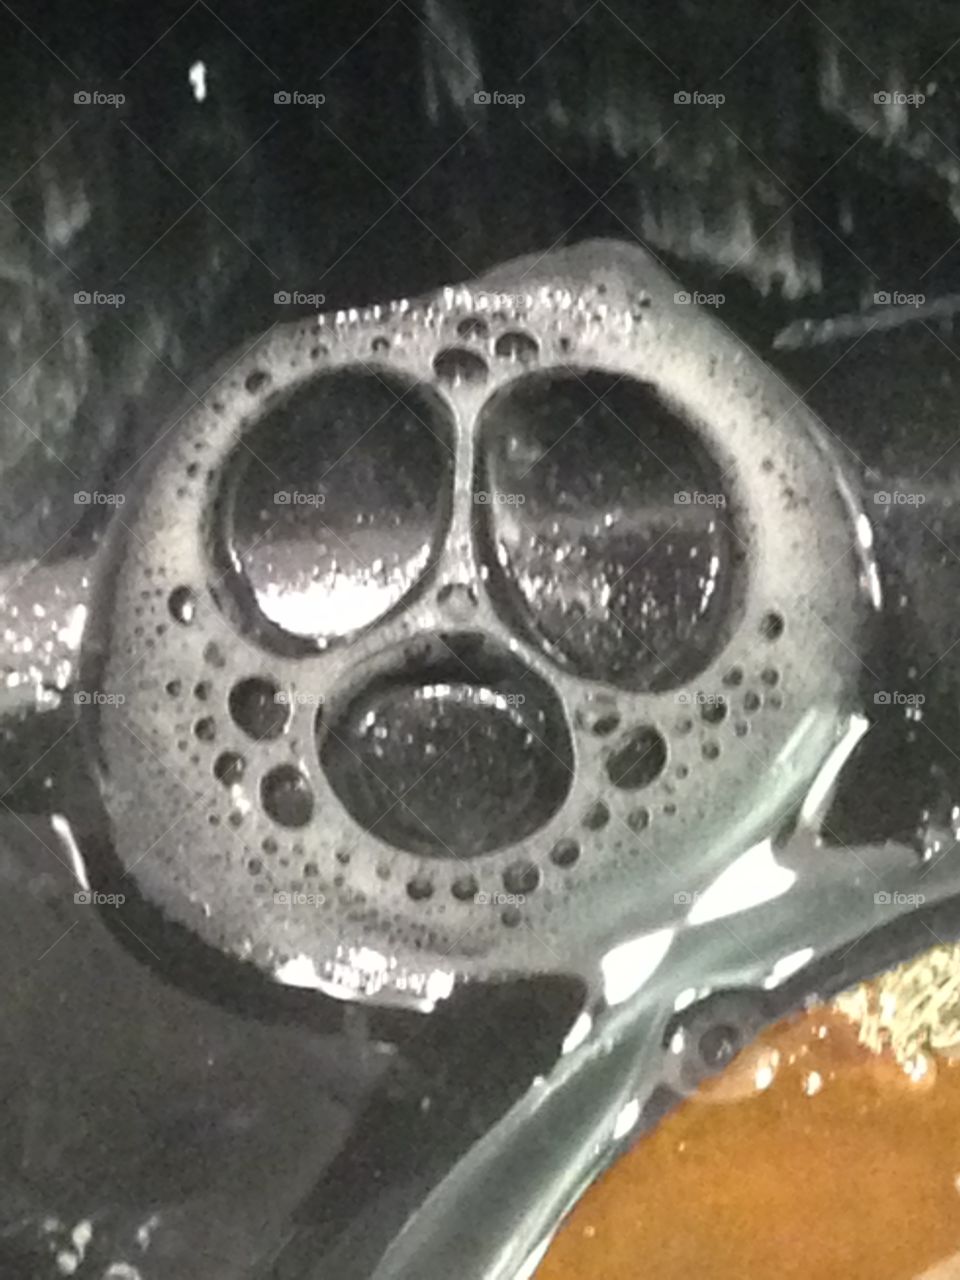 There's a sloth face in my bubbles!!!